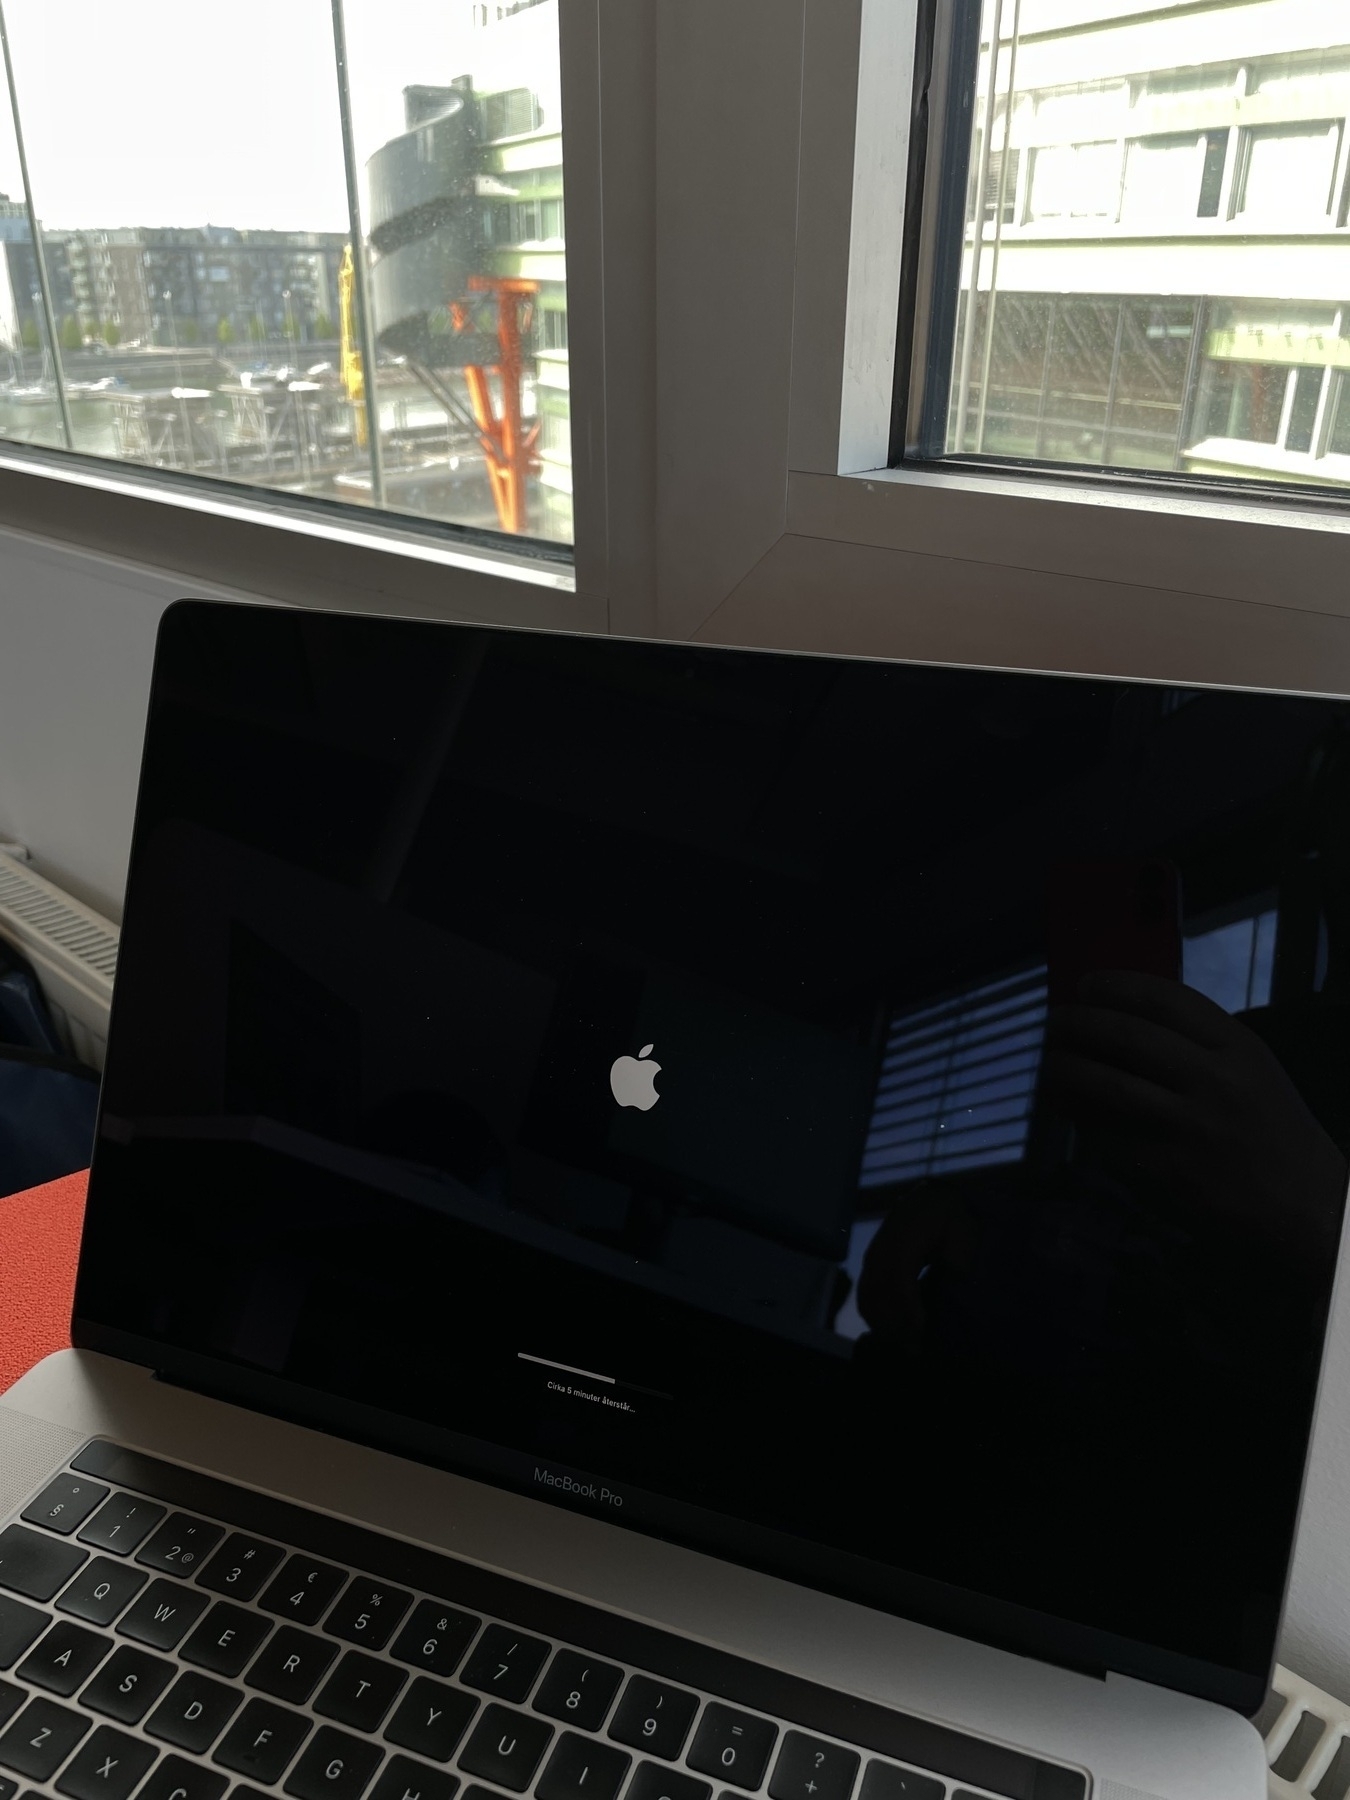 A MacBook Pro showing an Apple logo system update screen with a progress bar and 5 minutes ETA